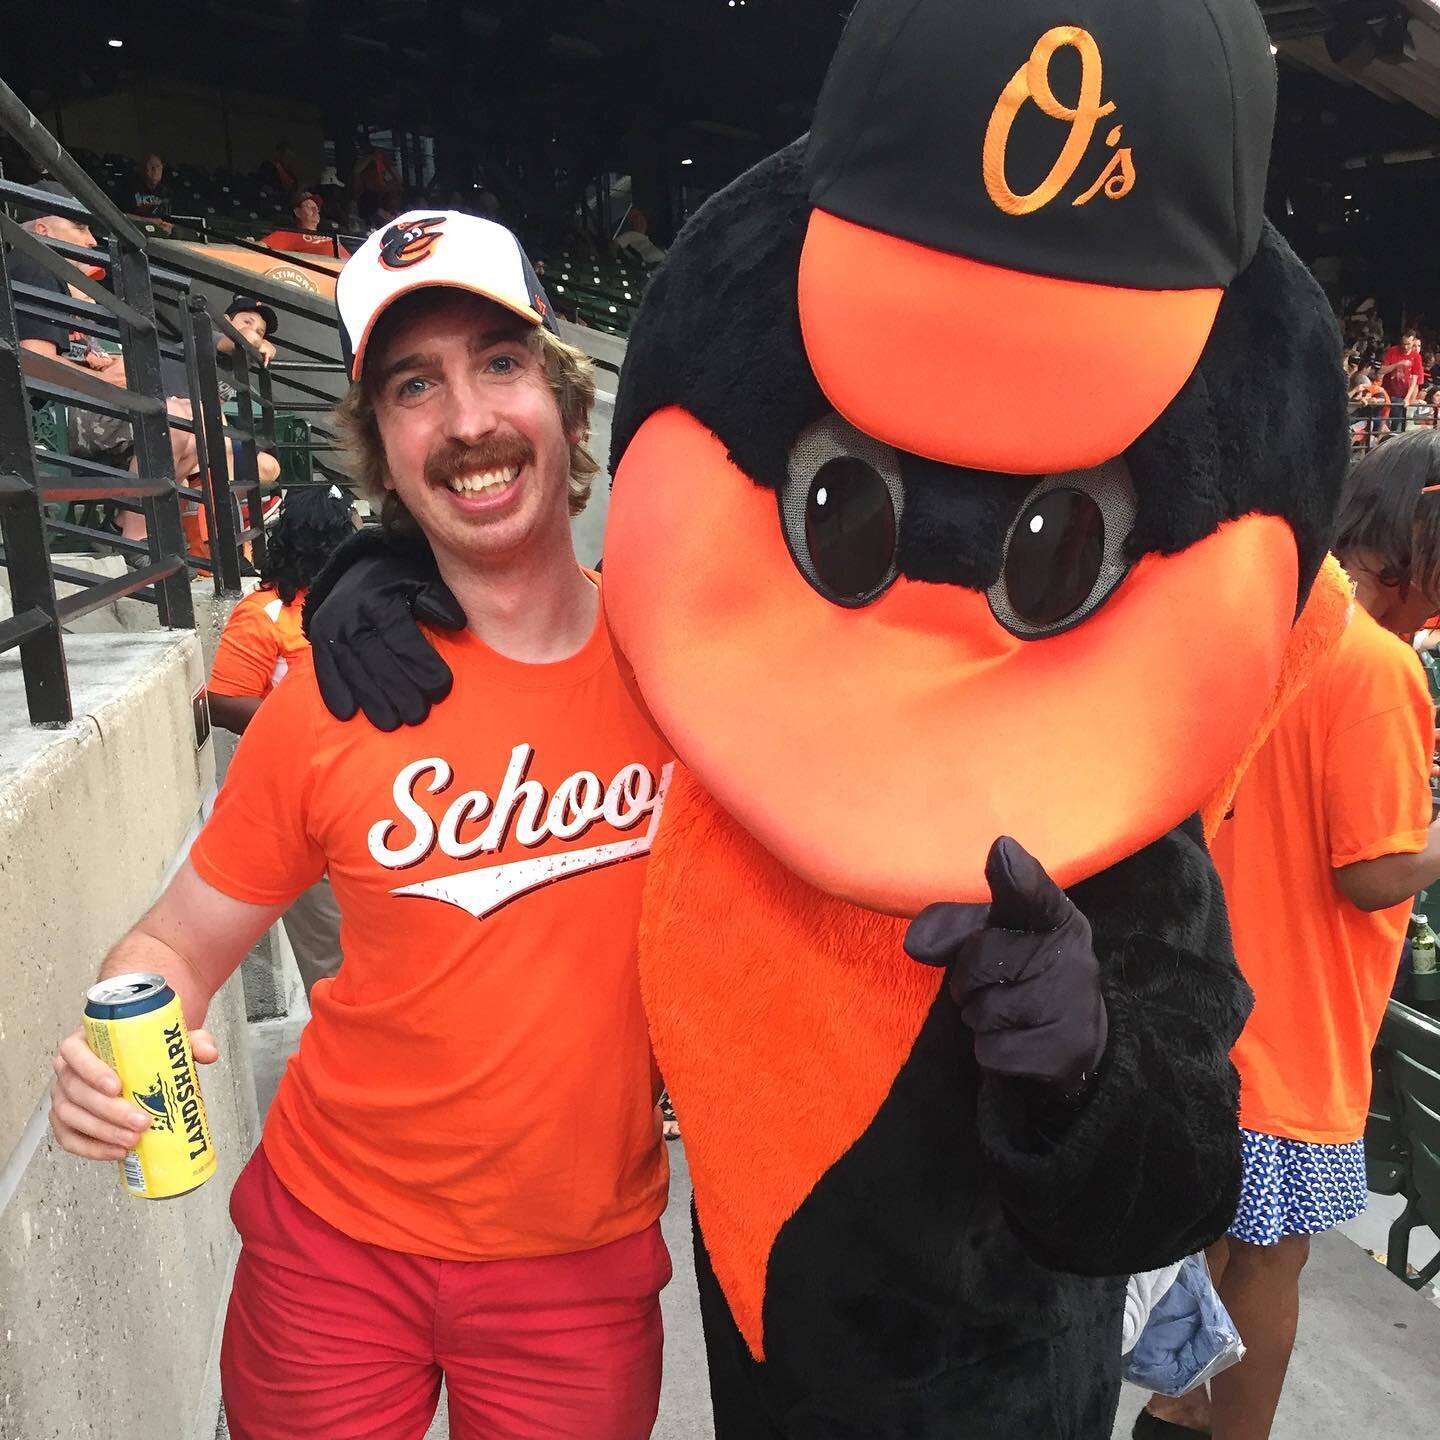 If my lifelong Yankees fan Dad didn&rsquo;t die 24 years ago today from lung/brain cancer he&rsquo;d probably have died when I showed him this photo of his only son draped in orange, wearing an O&rsquo;s hat, with his arm around the Orioles mascot at